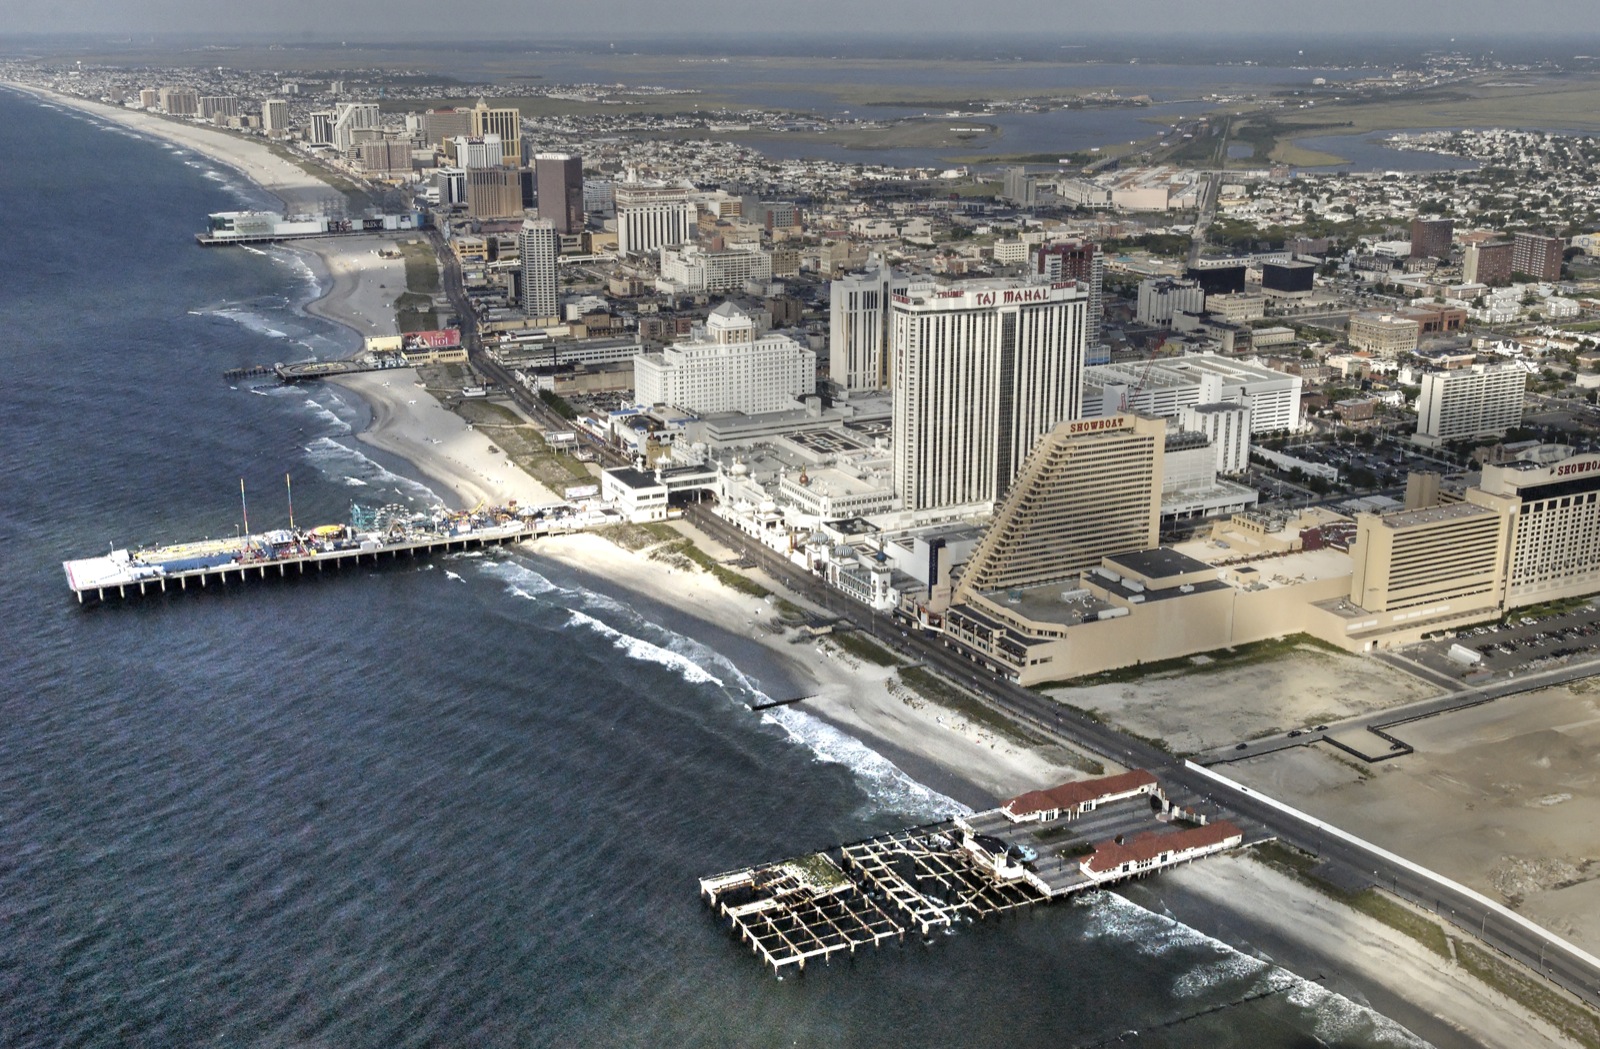 Atlantic City from the air